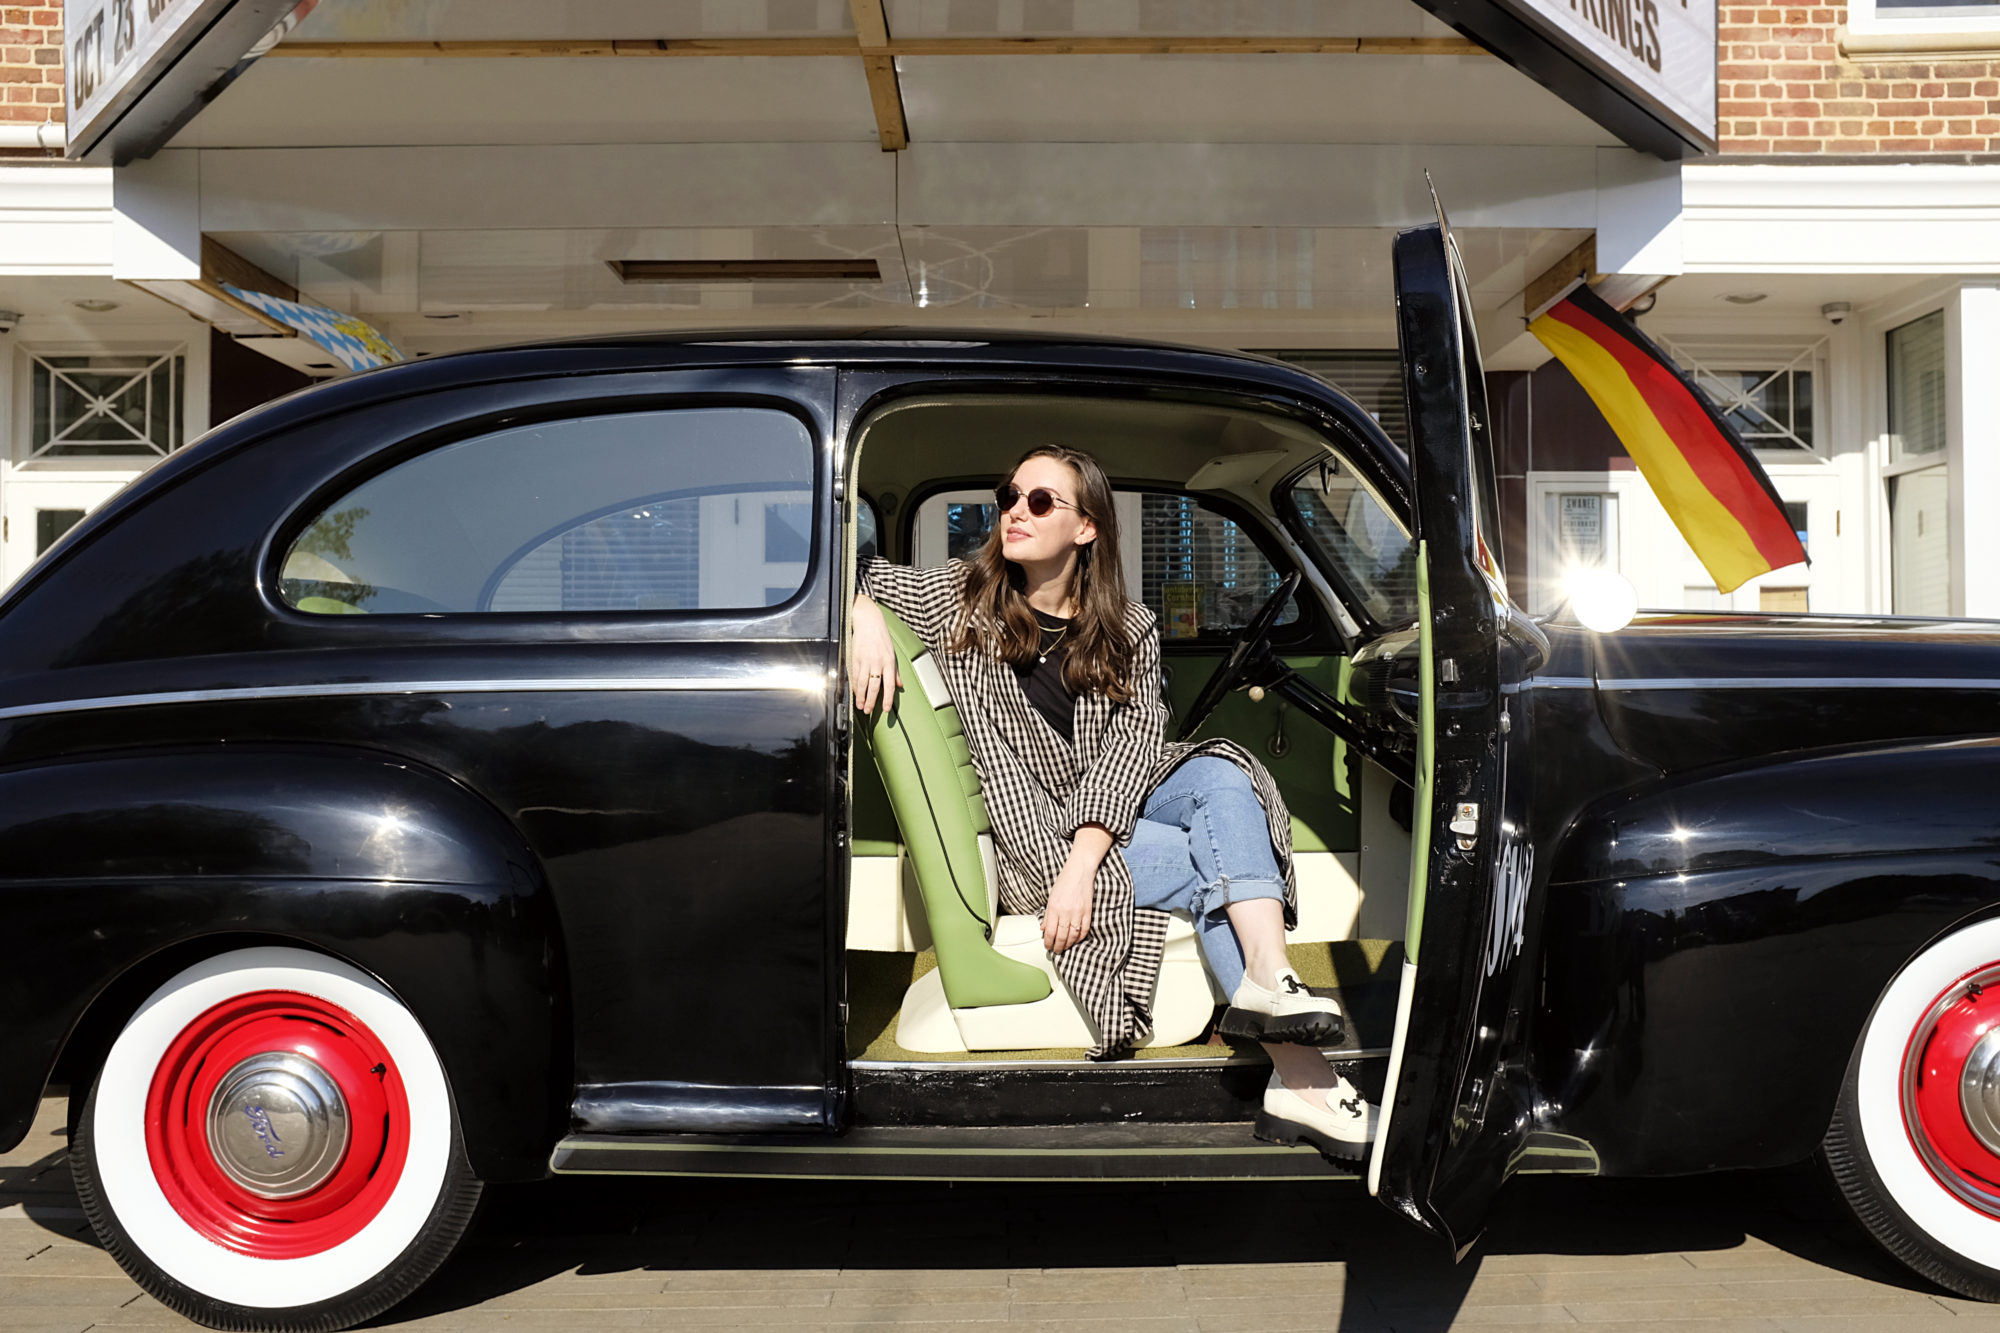 Alyssa sits in a vintage car wearing a black top, blue jeans, white loafers, and gingham trench